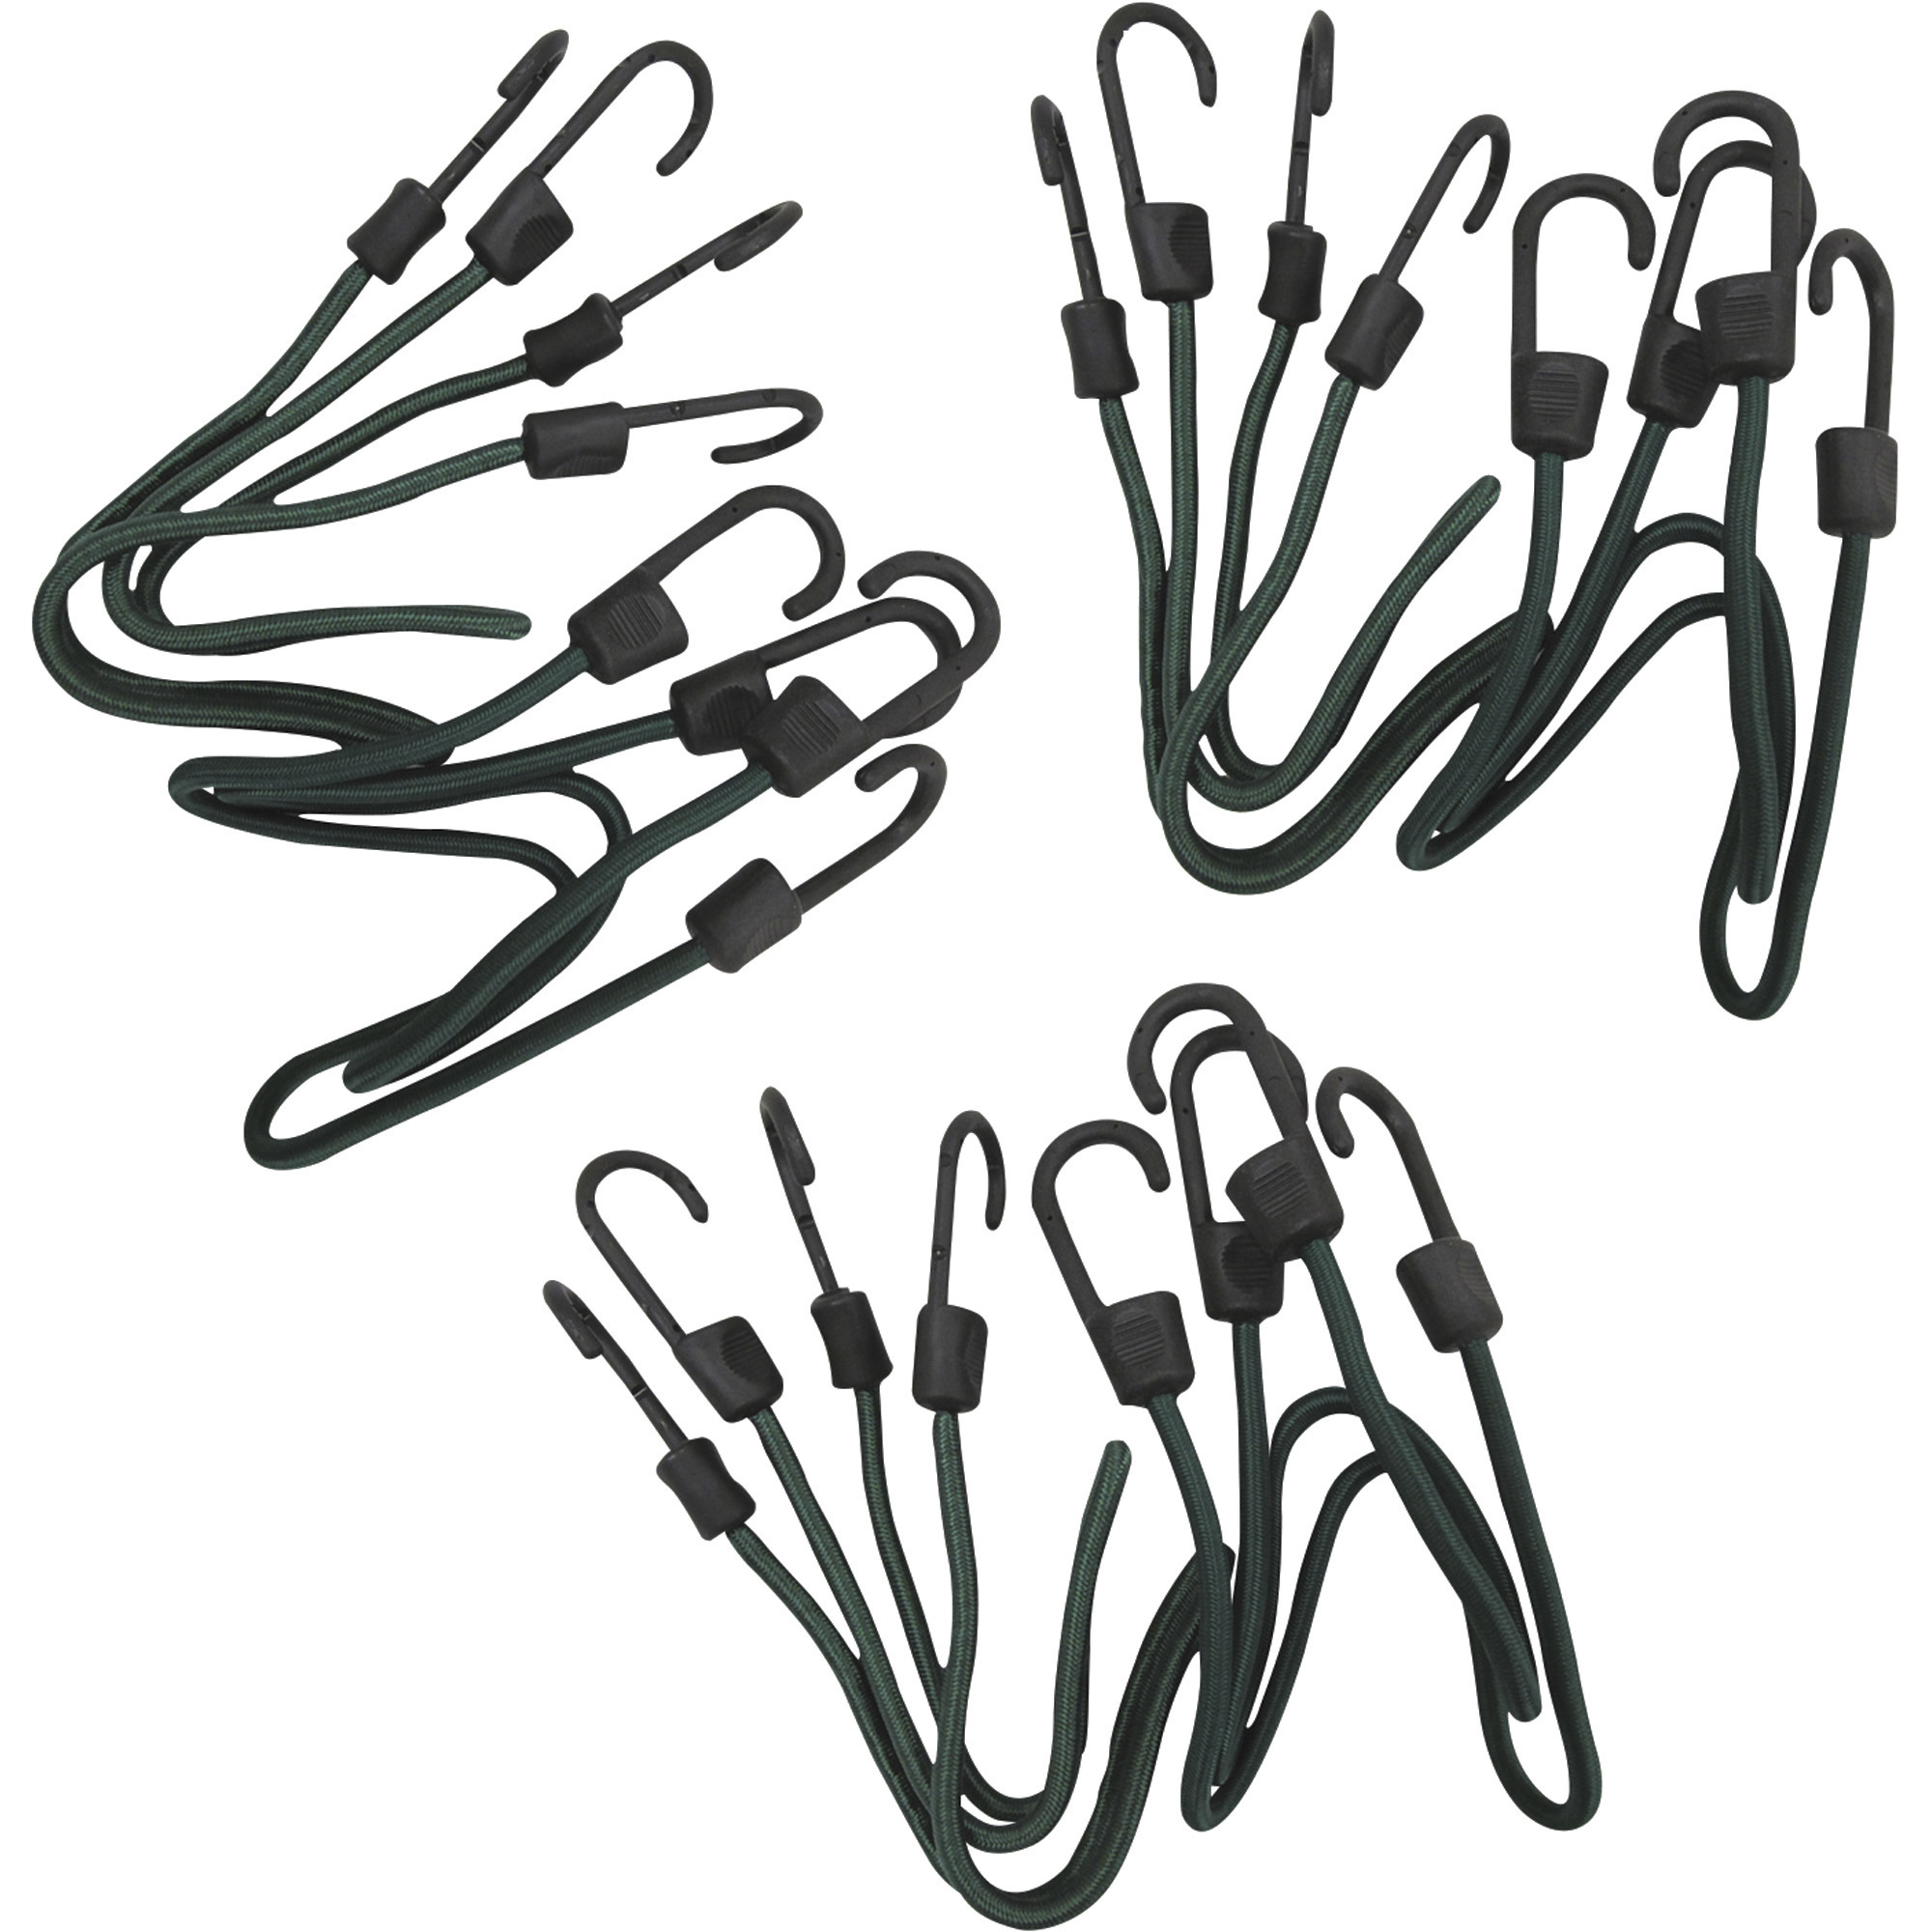 SmartStraps 12-Pack of 24Inch Bungee Cords, Model 693